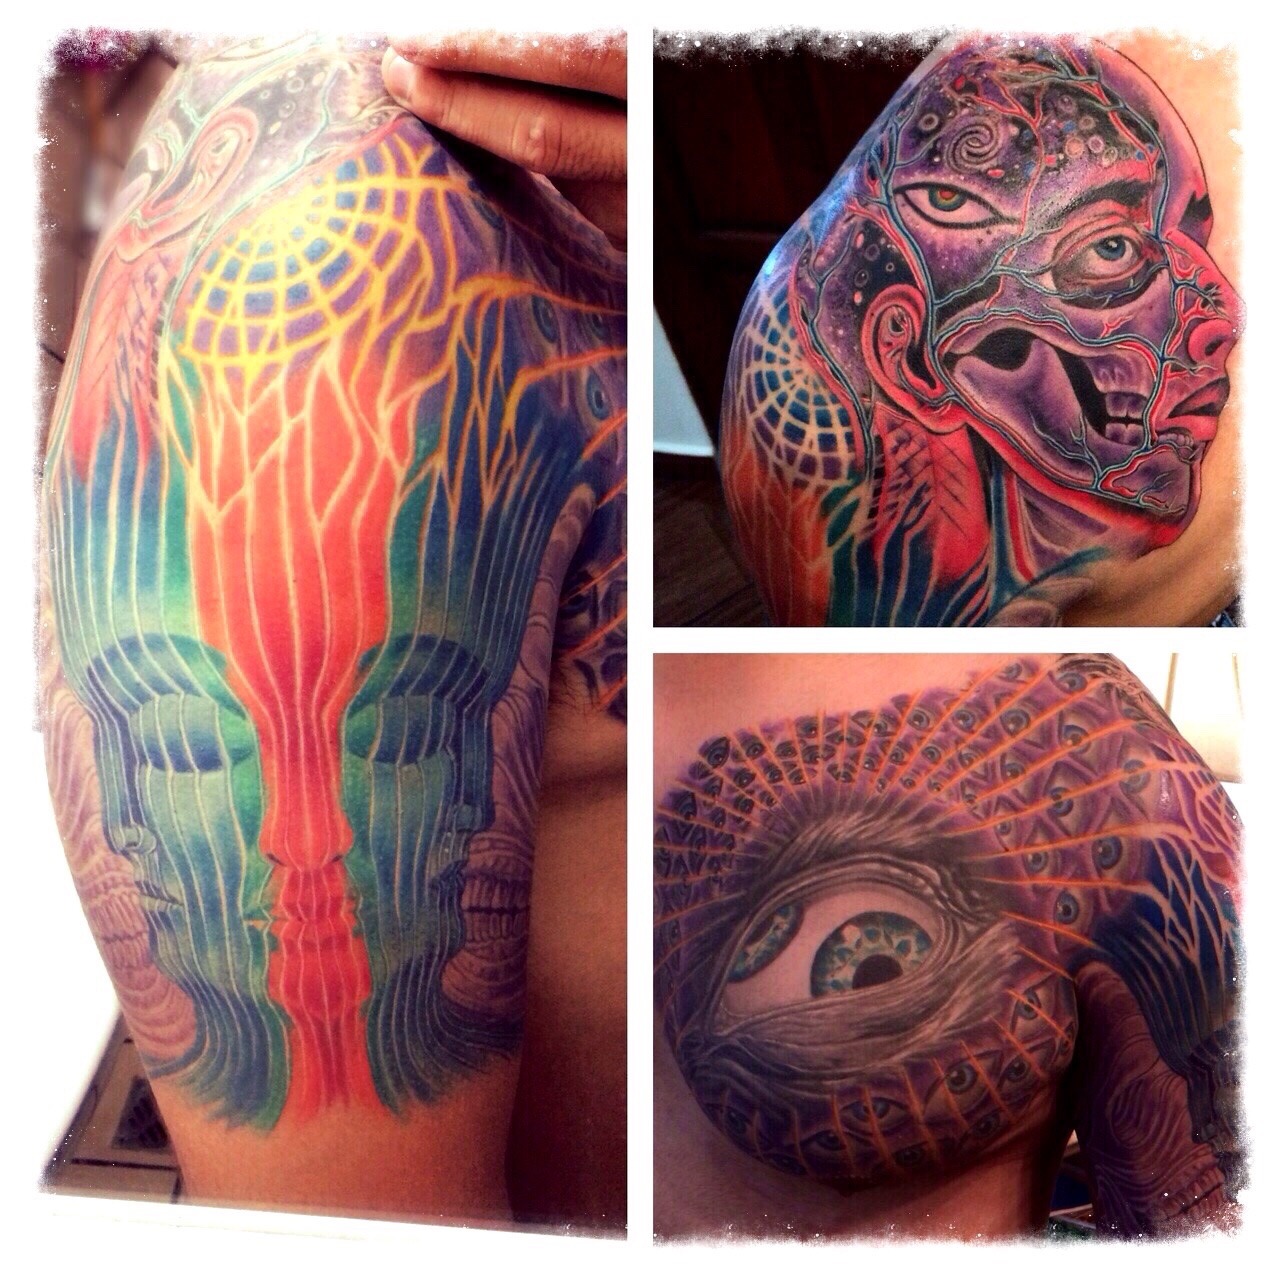 My Tool &amp; Alex Grey Tattoo HOLY COW THATS SWEET! THANX FOR THE SUBMISSION!